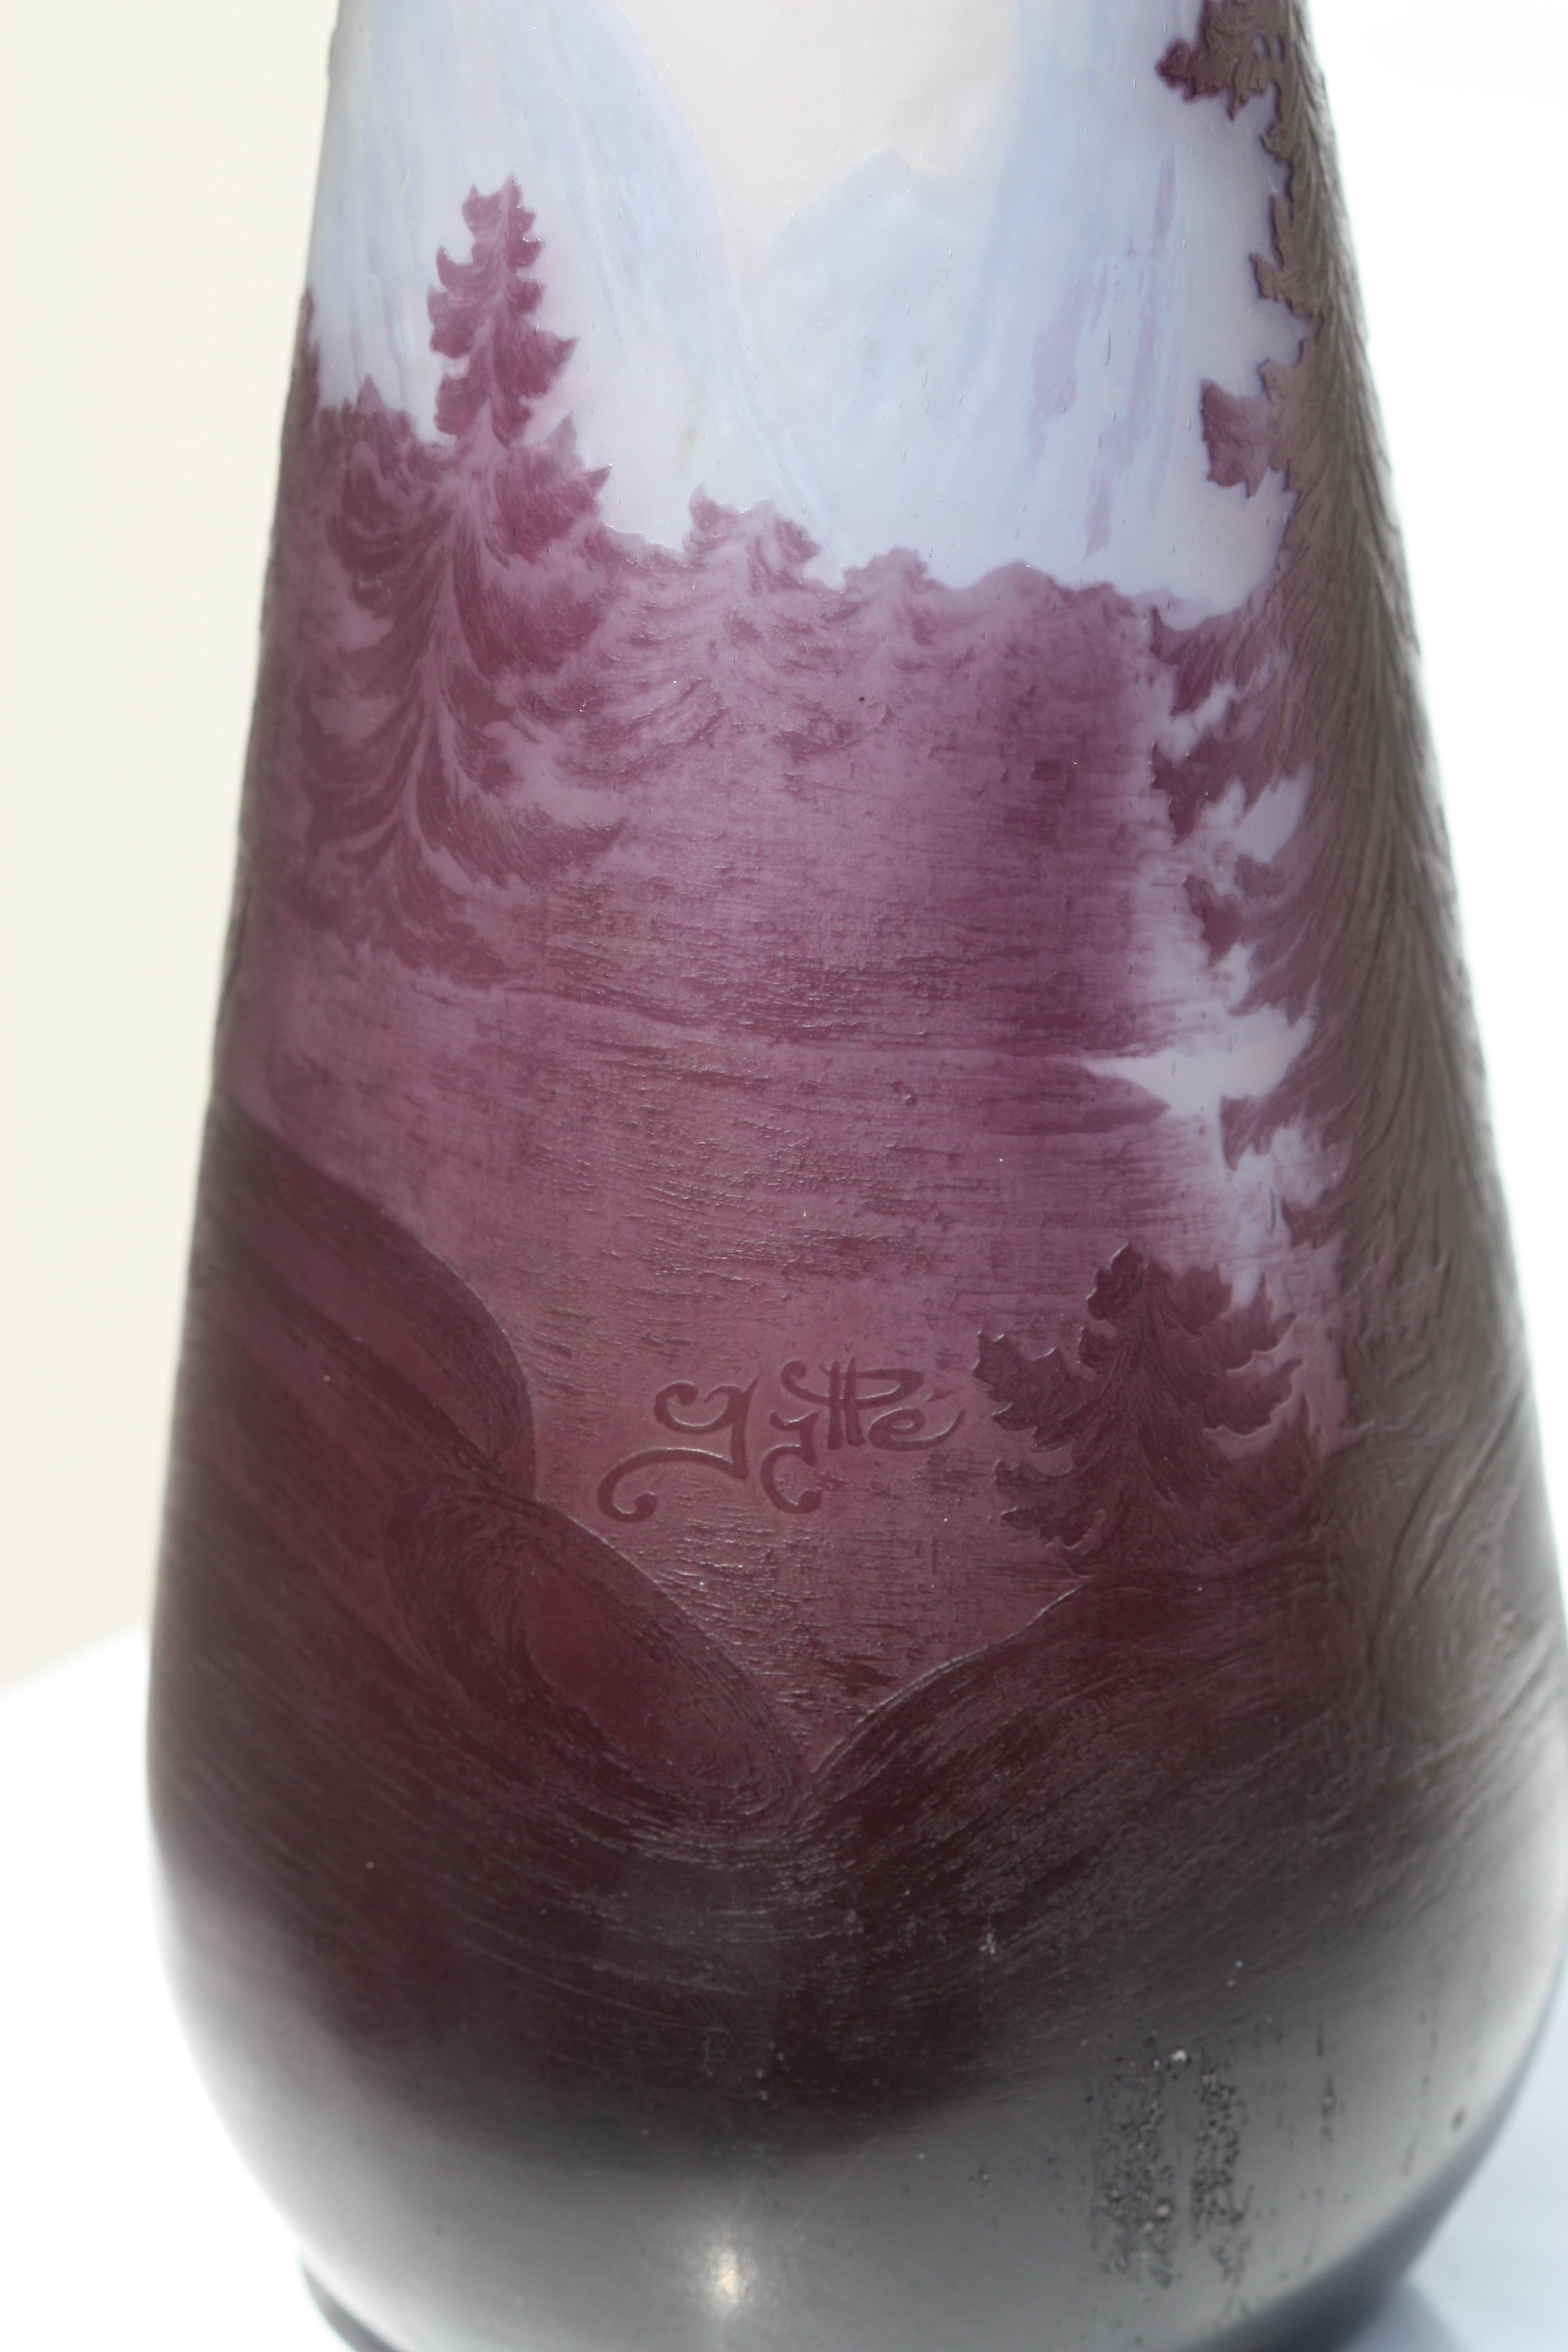 Art Glass Emile Galle Overlaid and Etched Glass Vase, circa 1900 For Sale